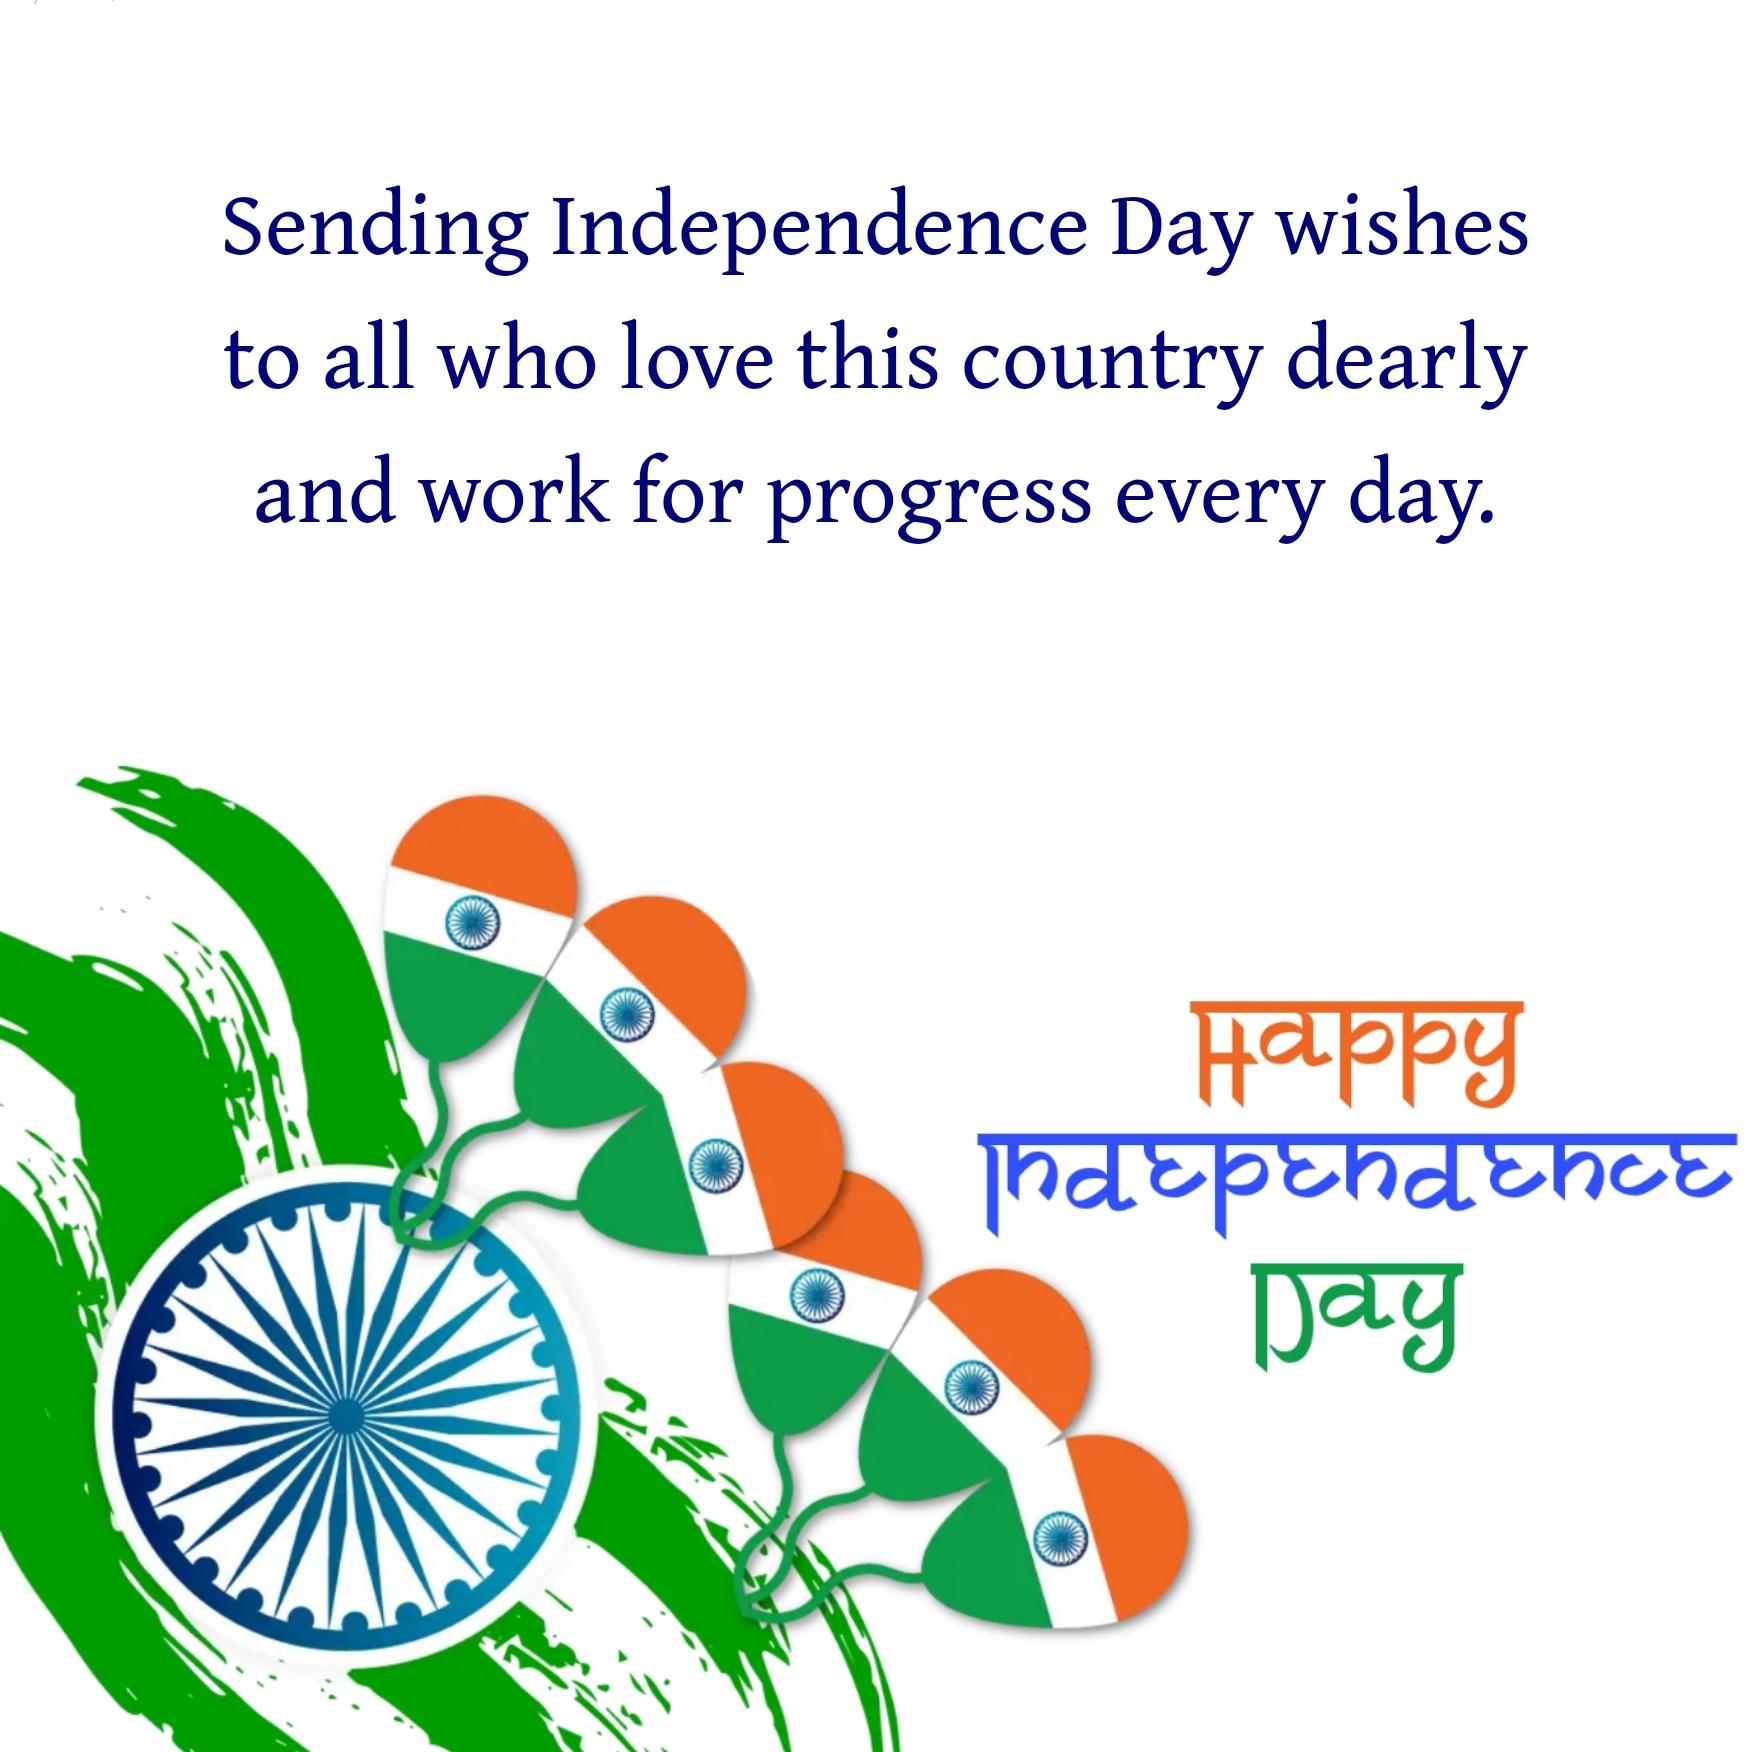 Sending Independence Day wishes to all who love this country